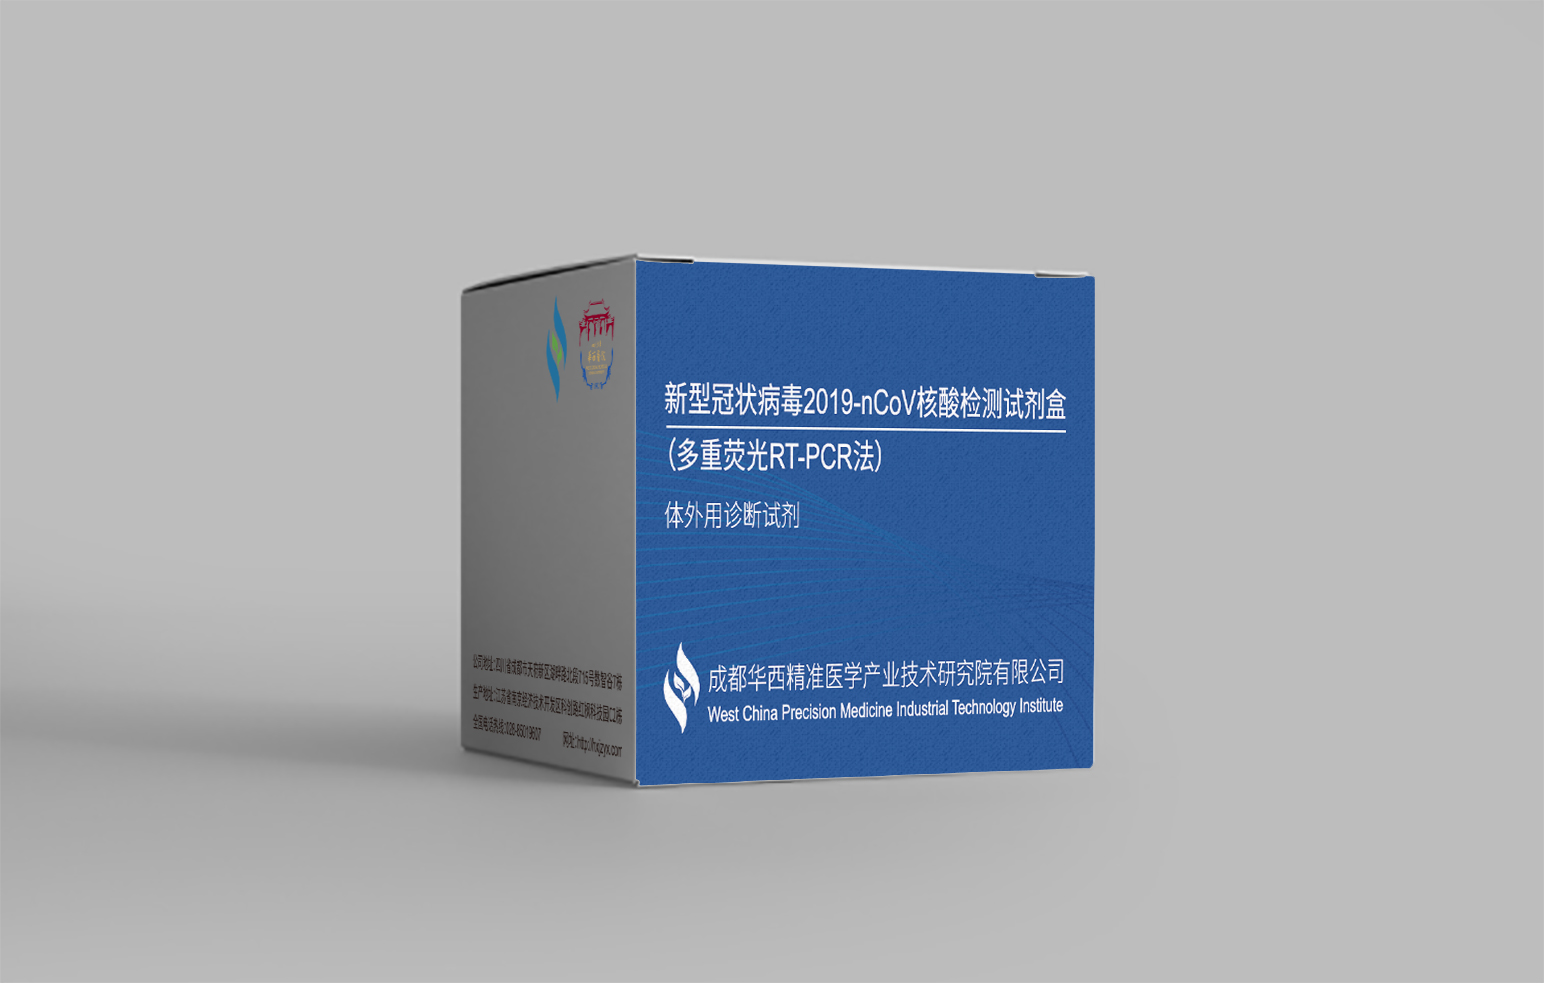 West China Hospital: COVID-19 Diagnosis Can Be Done in Just 10 Minutes  with a S